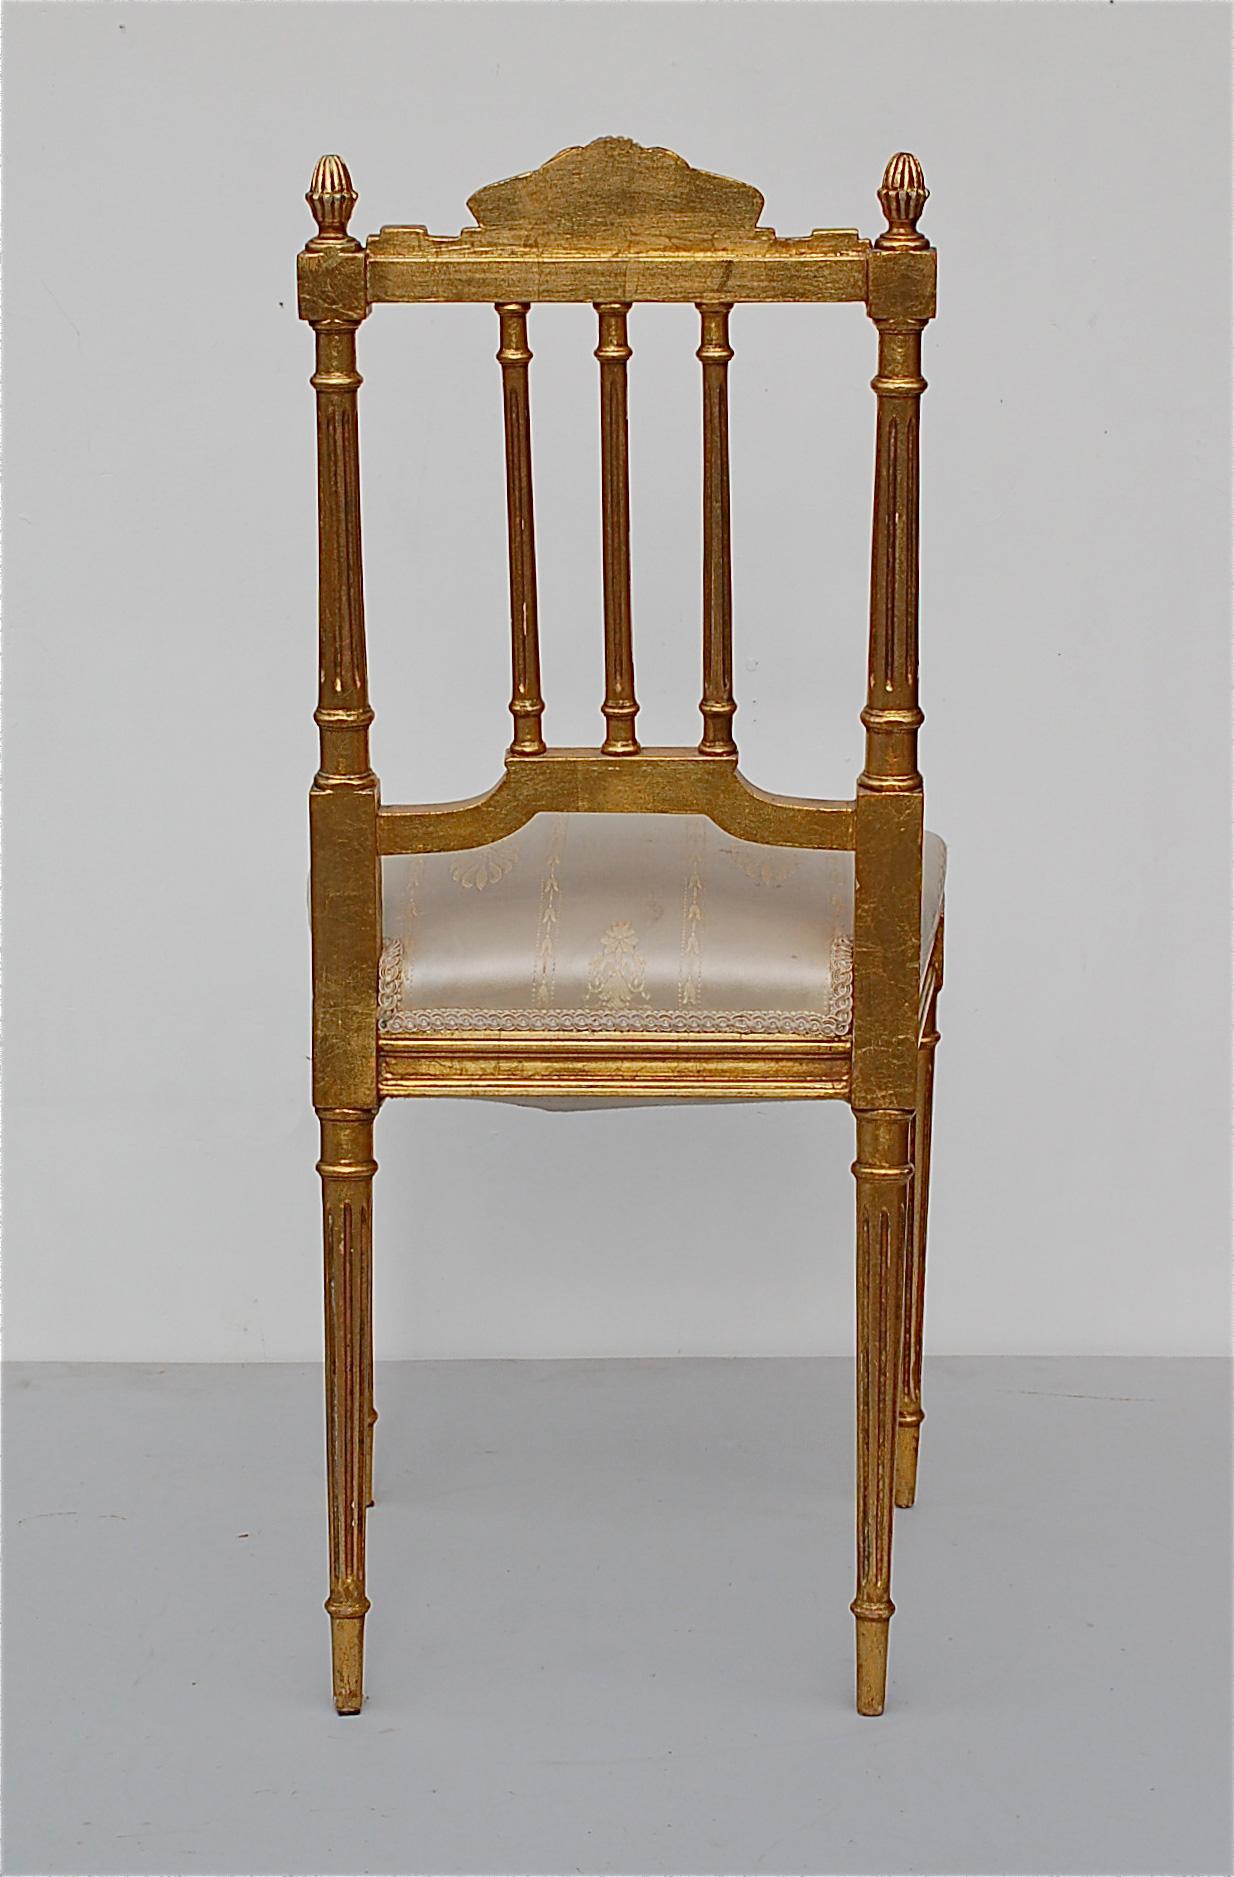 French Empire Style Giltwood Chair, Early 20th Century, France (Französisch)